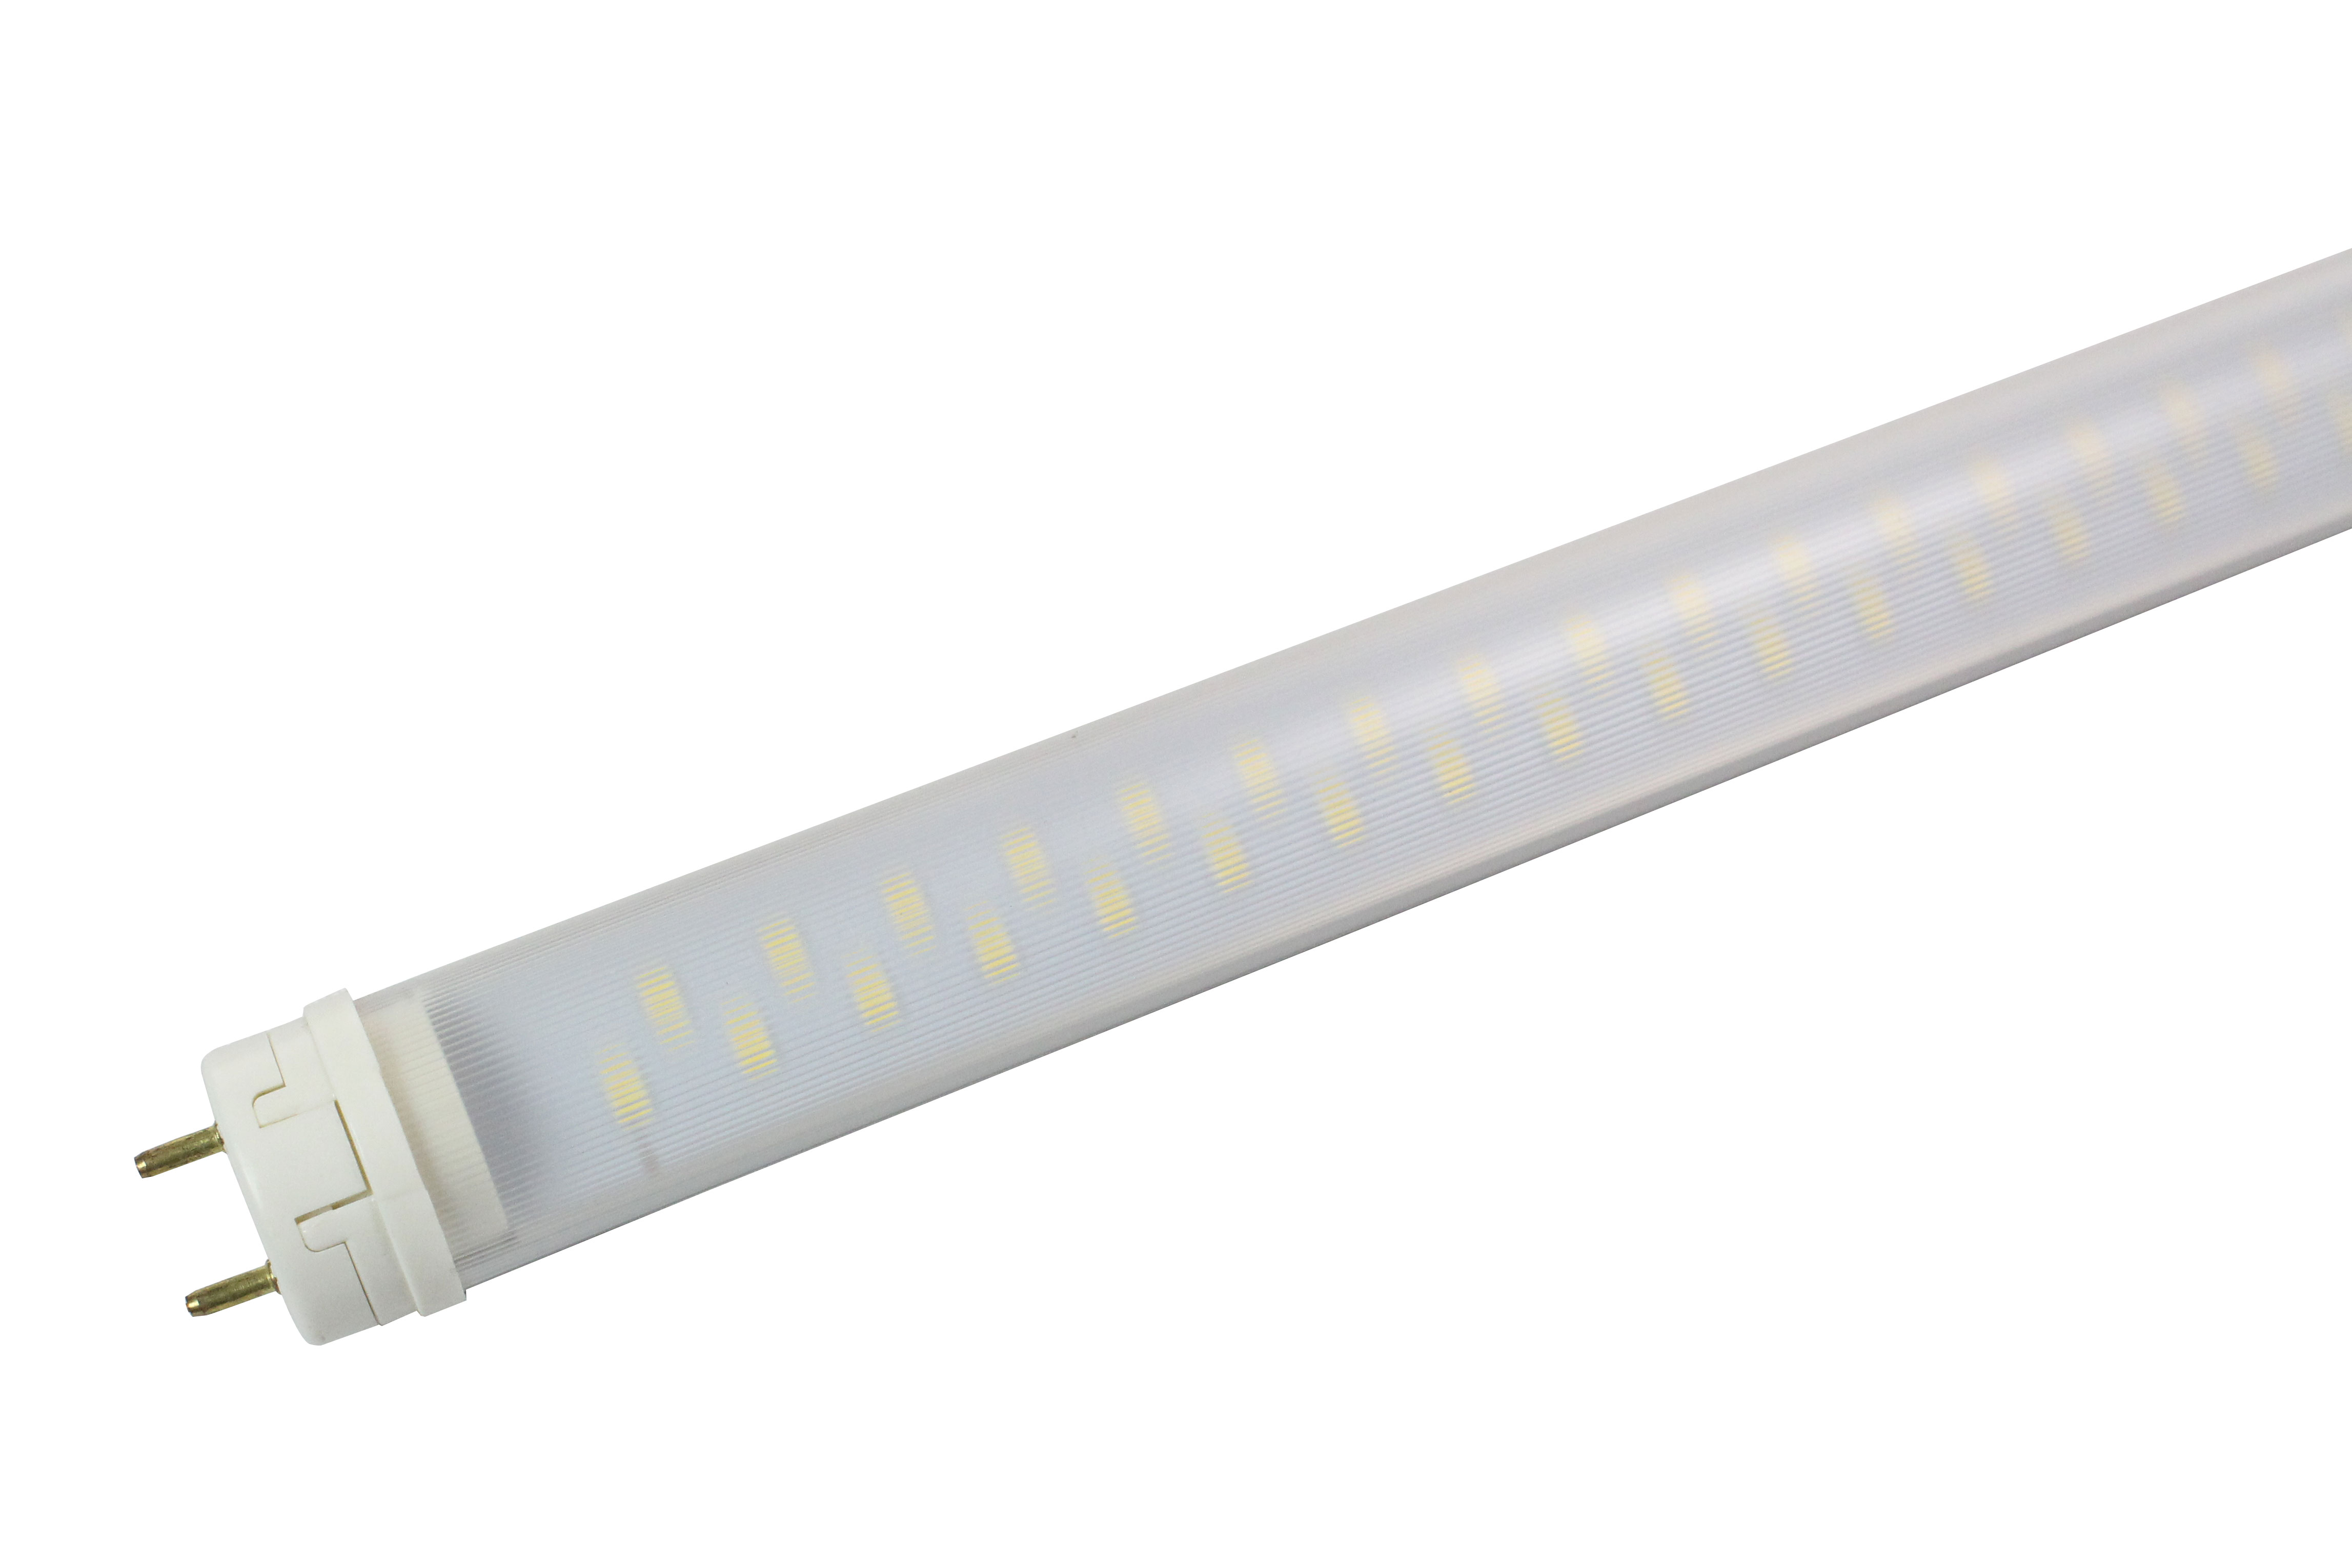 Four Foot T8 LED Lamp that produces 2,000 lumens of light